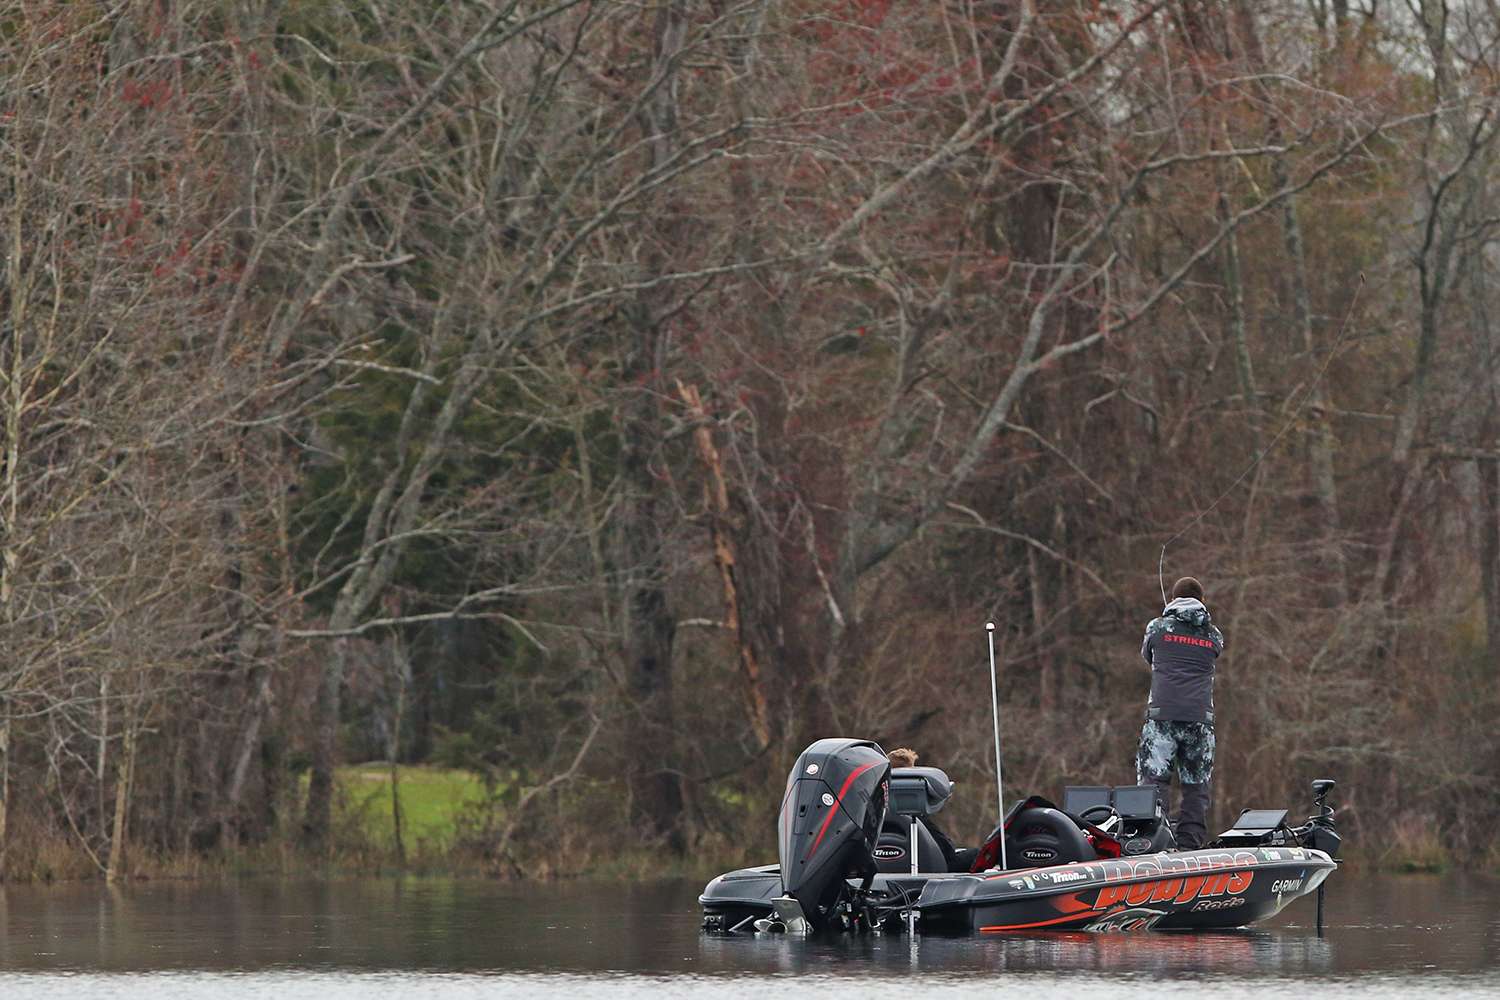 We headed up beyond Goose Pond along the upper reaches of Lake Guntersville to find Paul Mueller, Scott Canterbury and Caleb Kuphall during the official practice for the 2020 Academy Sports + Outdoors Bassmaster Classic presented by Huk.